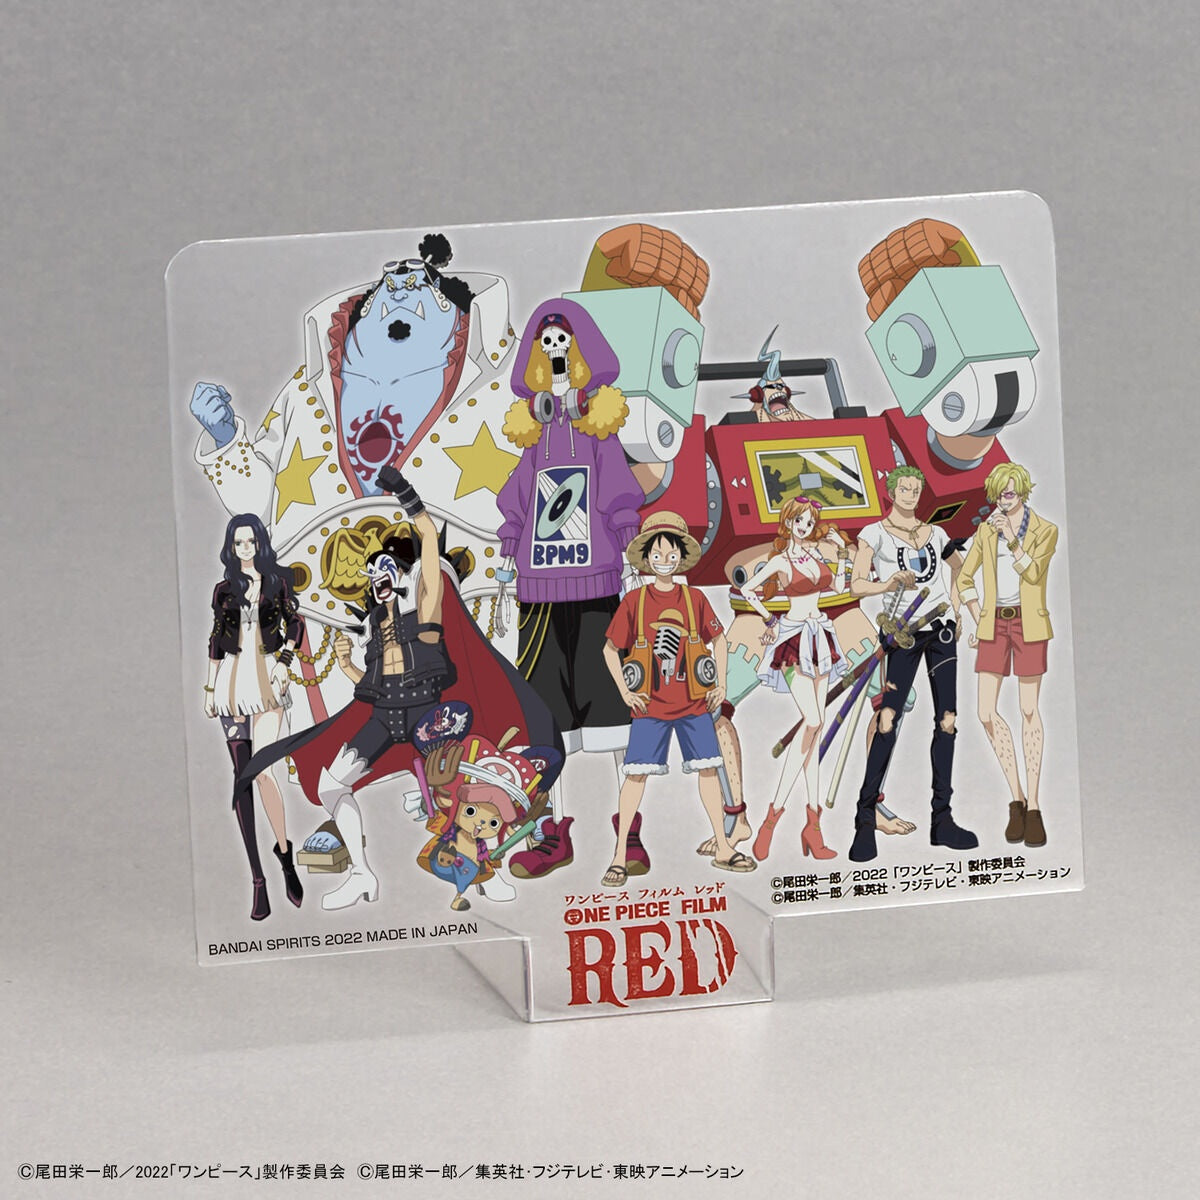 One Piece Grand Ship Collection - Thousand Sunny ("One Piece Film Red" Version)